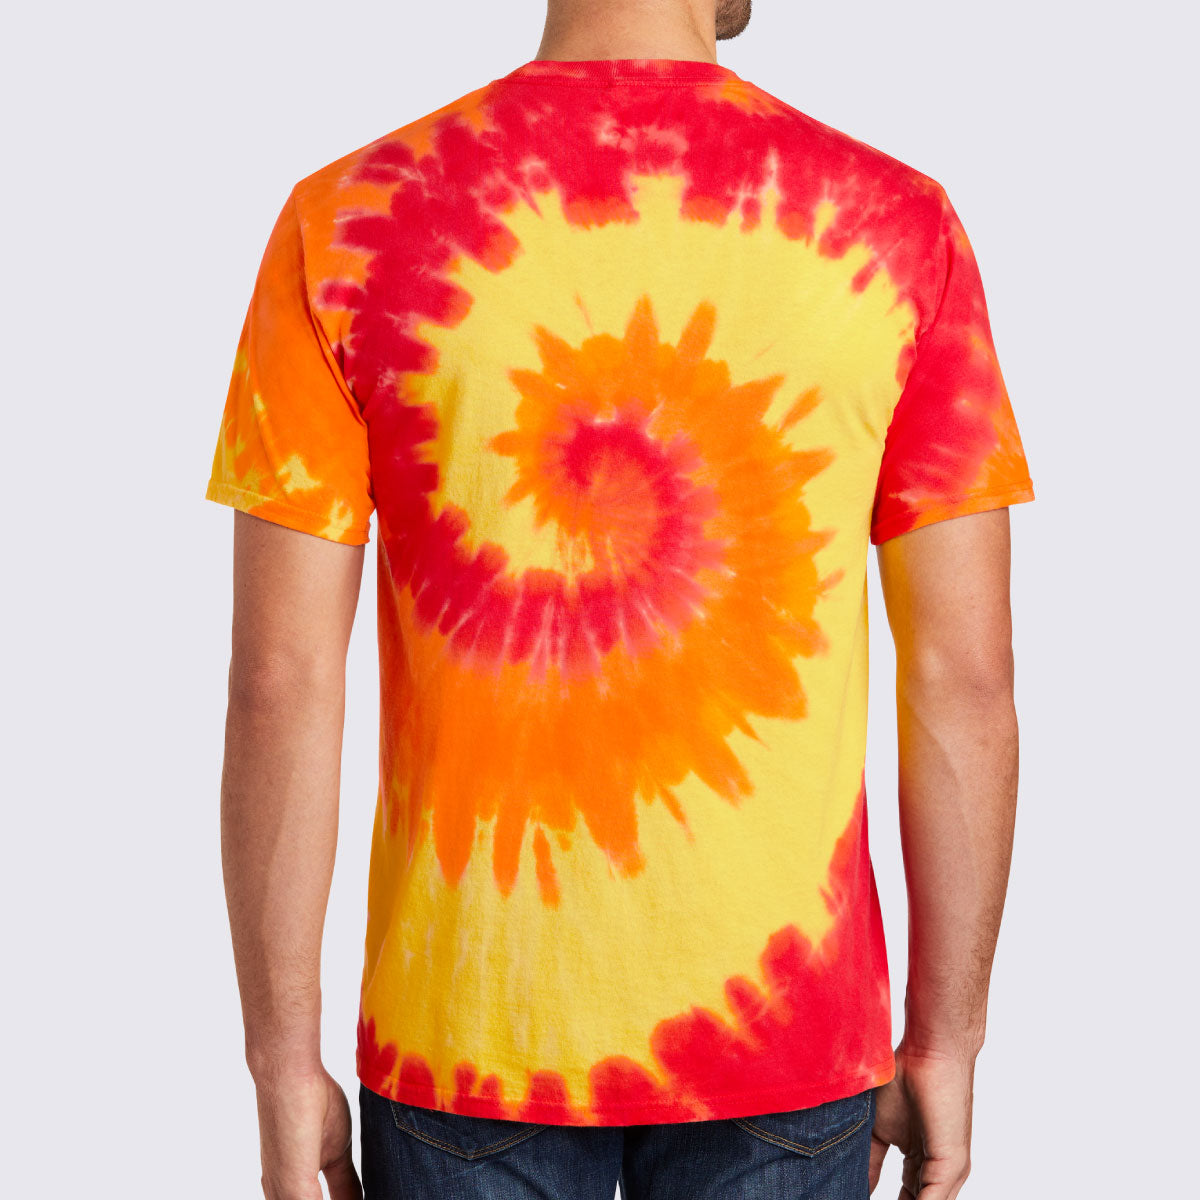 Weed Be Workout Friends Spiral Tie-Dye Tee